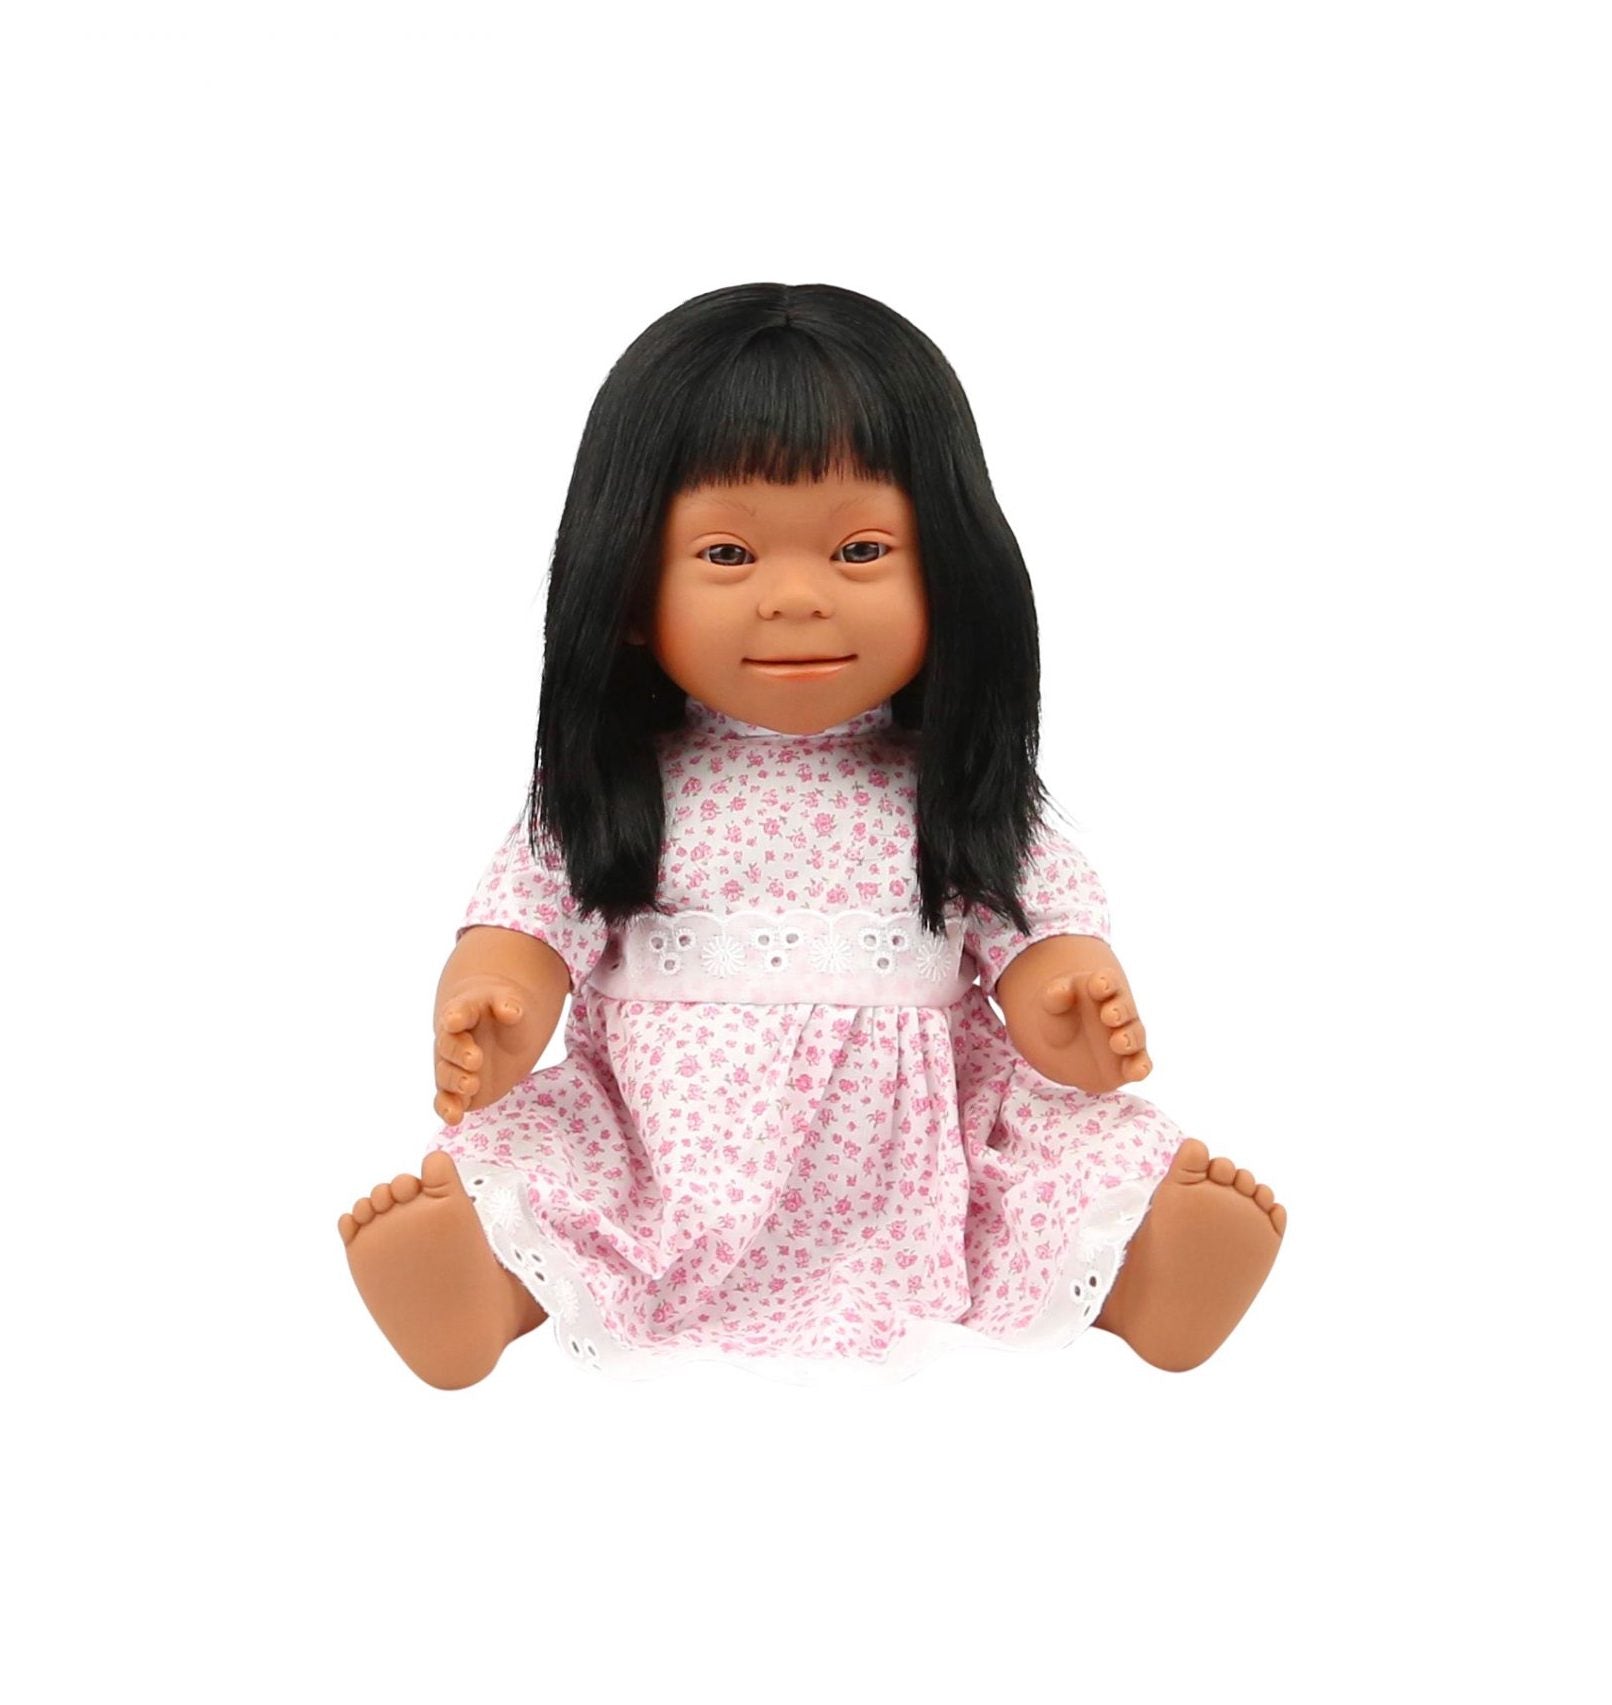 15 Baby Doll Asian Girl w/ Down Syndrome - Kids Toys